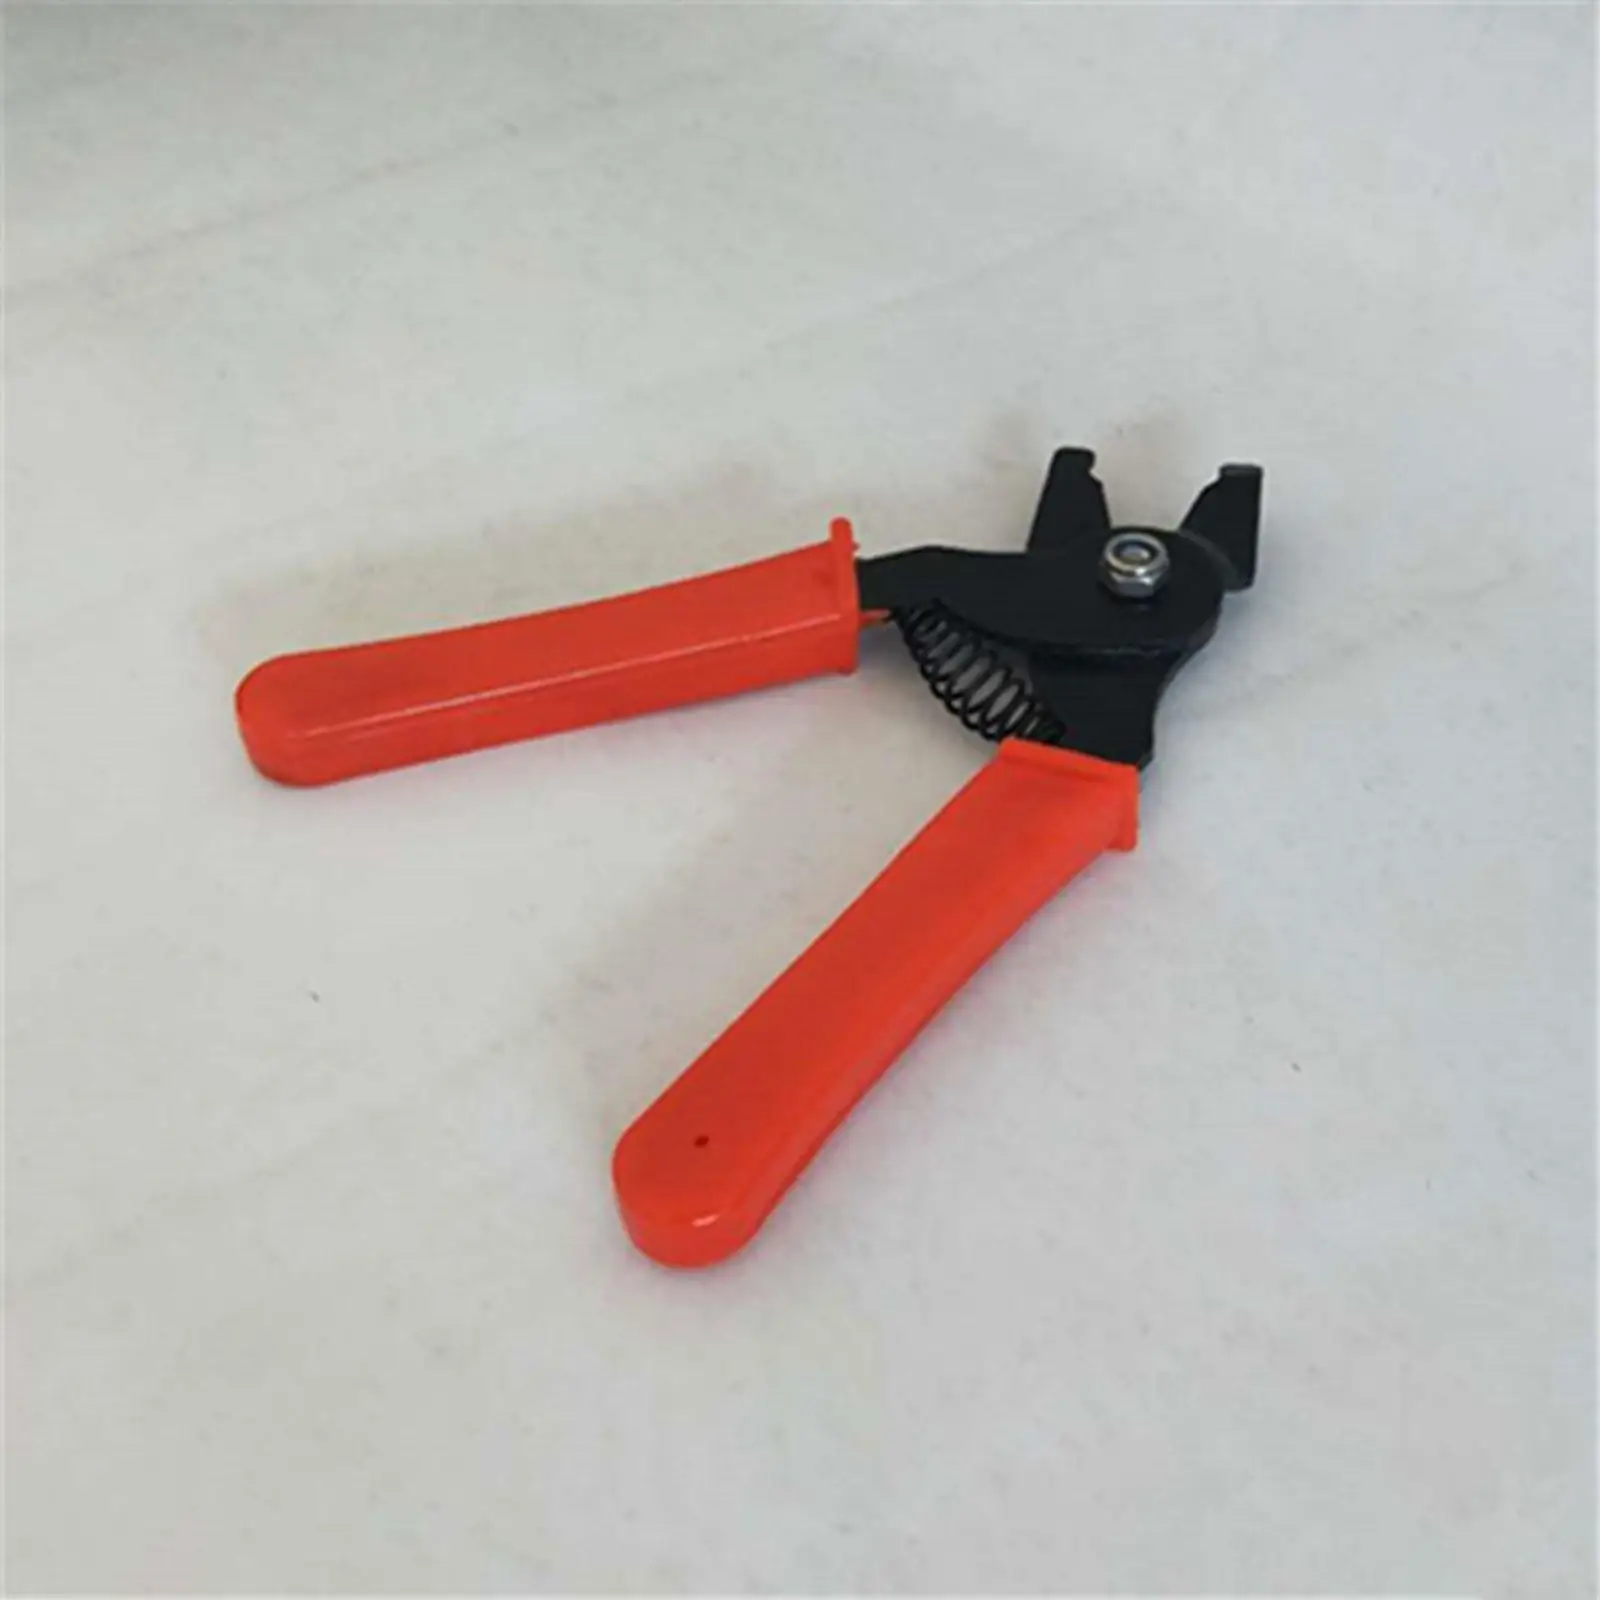 Multifunction Hog Ring Pliers Stable Durable Simlple to Use Cage Pliers for Birdcage Poultry Cages Pet Cages Repair Equipment